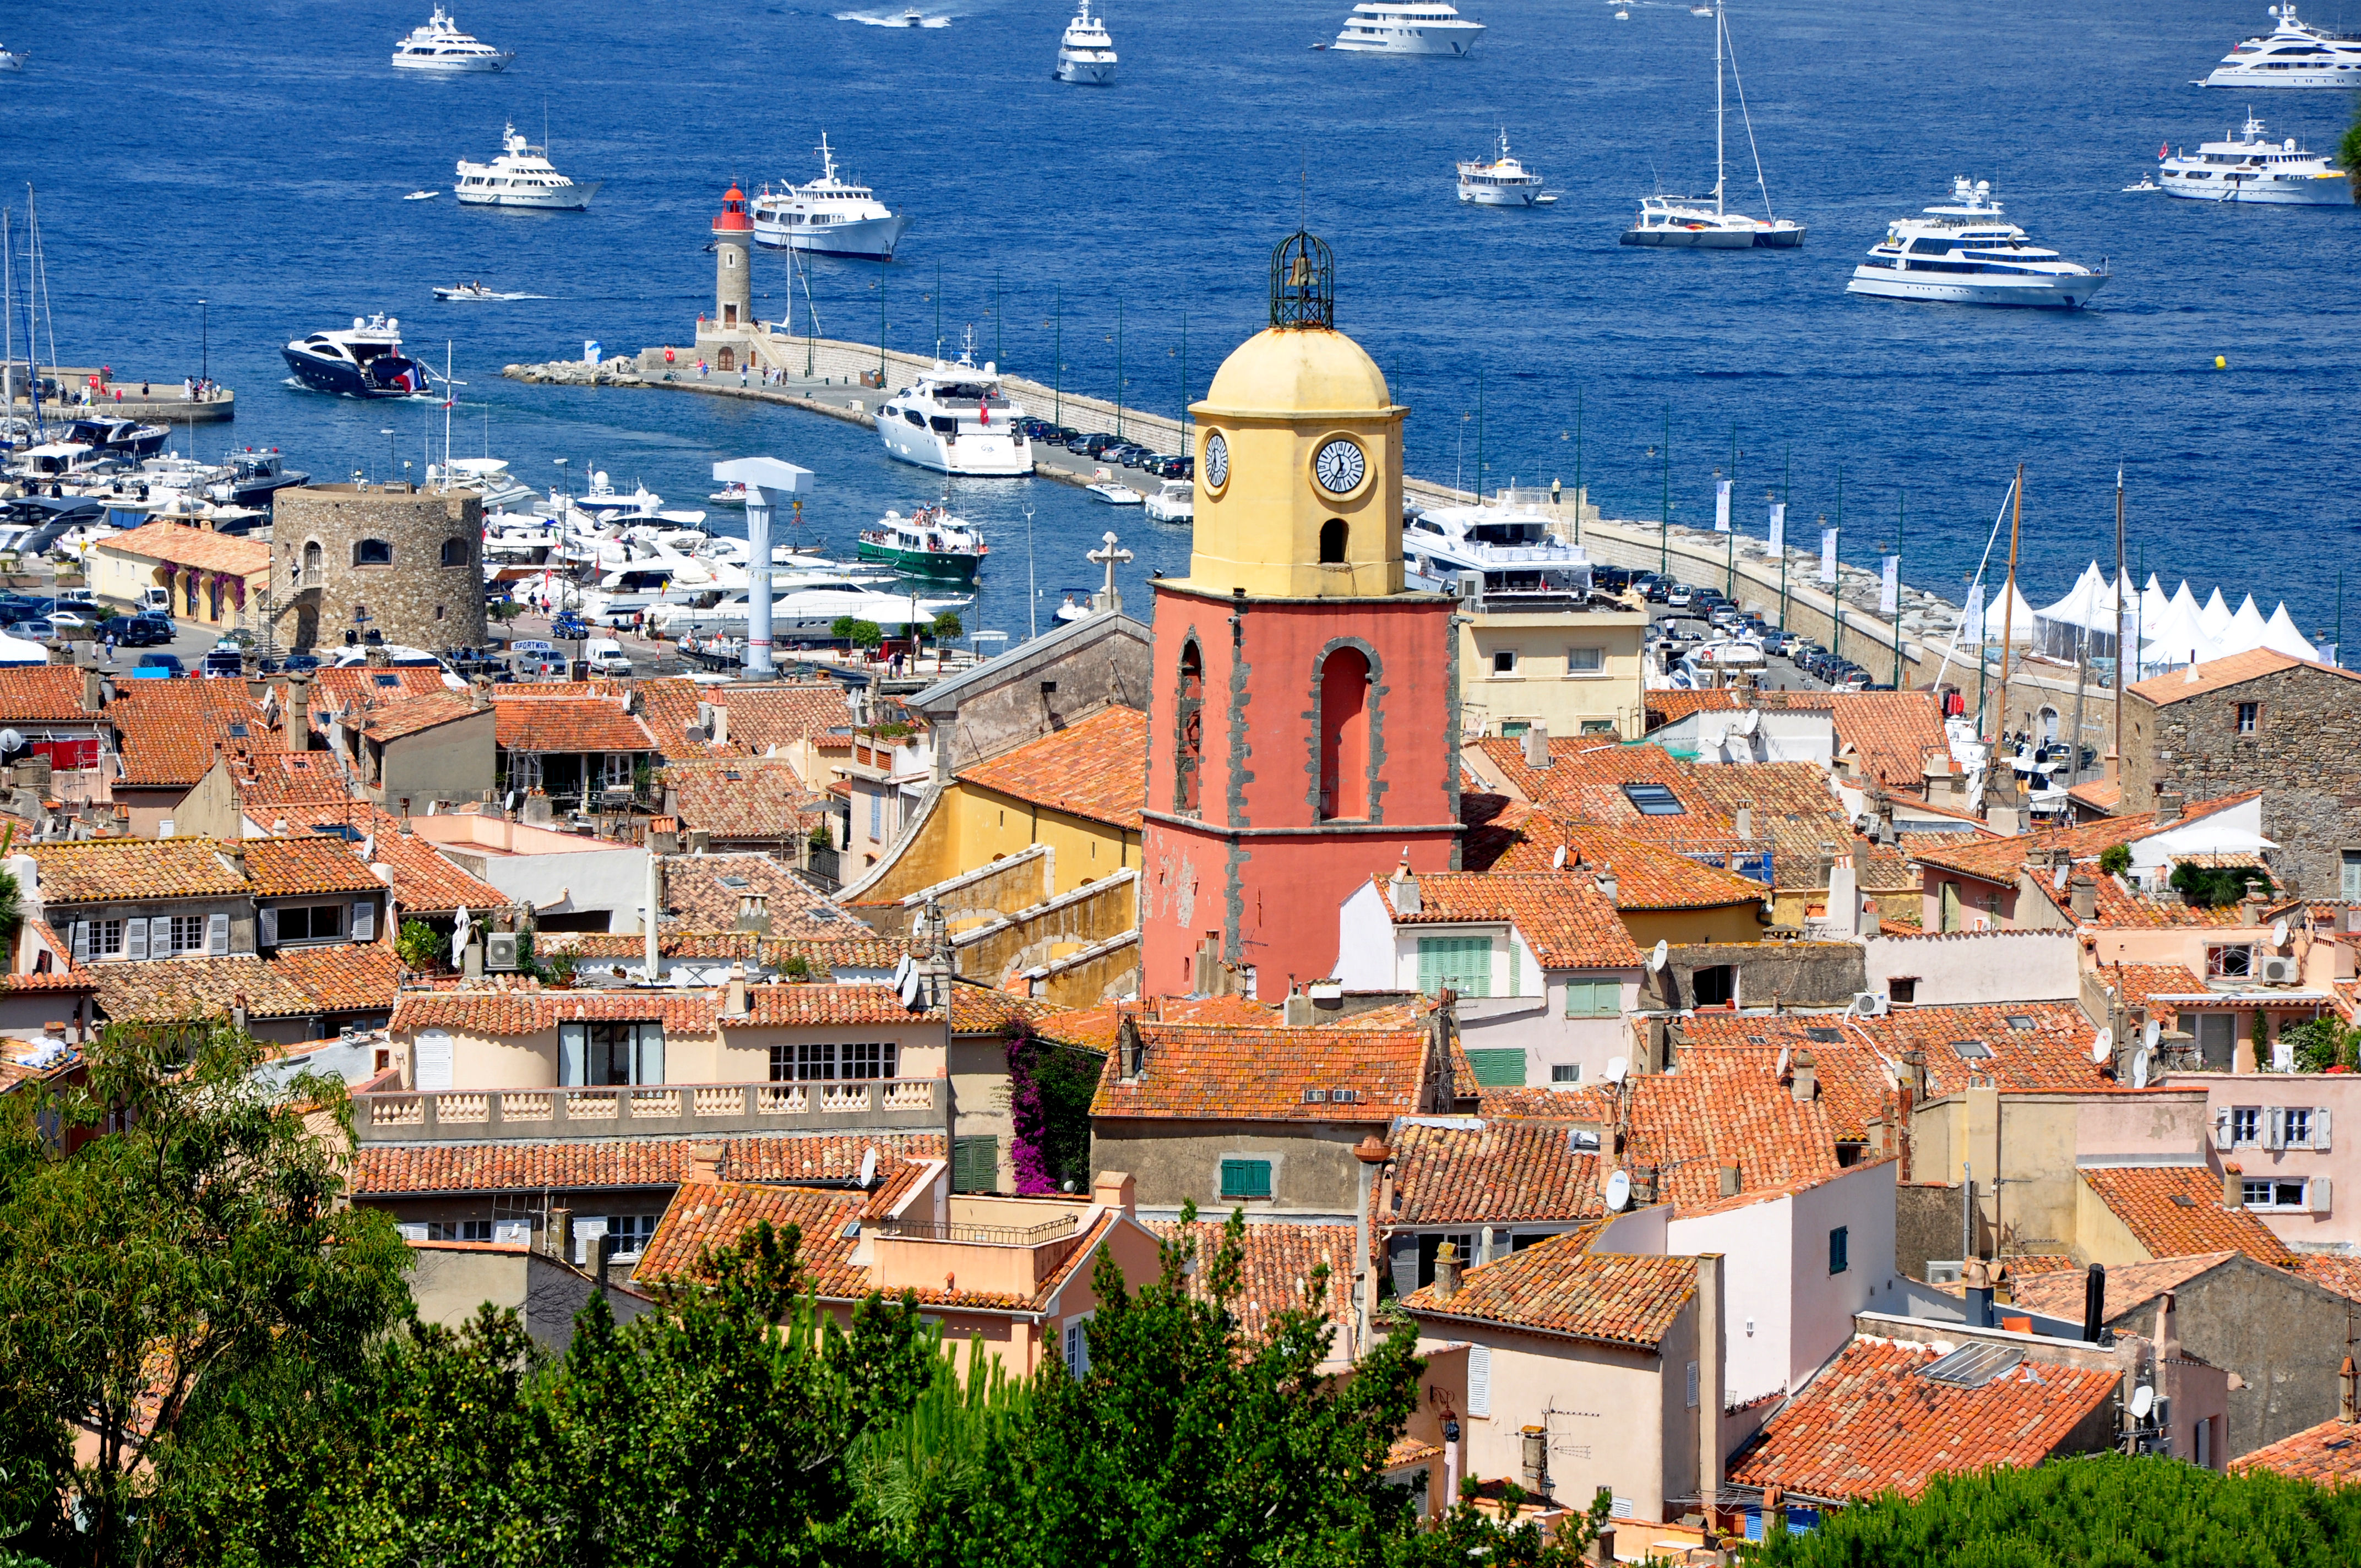 Where to stay in Saint Tropez [Comprehensive Guide for 2023]